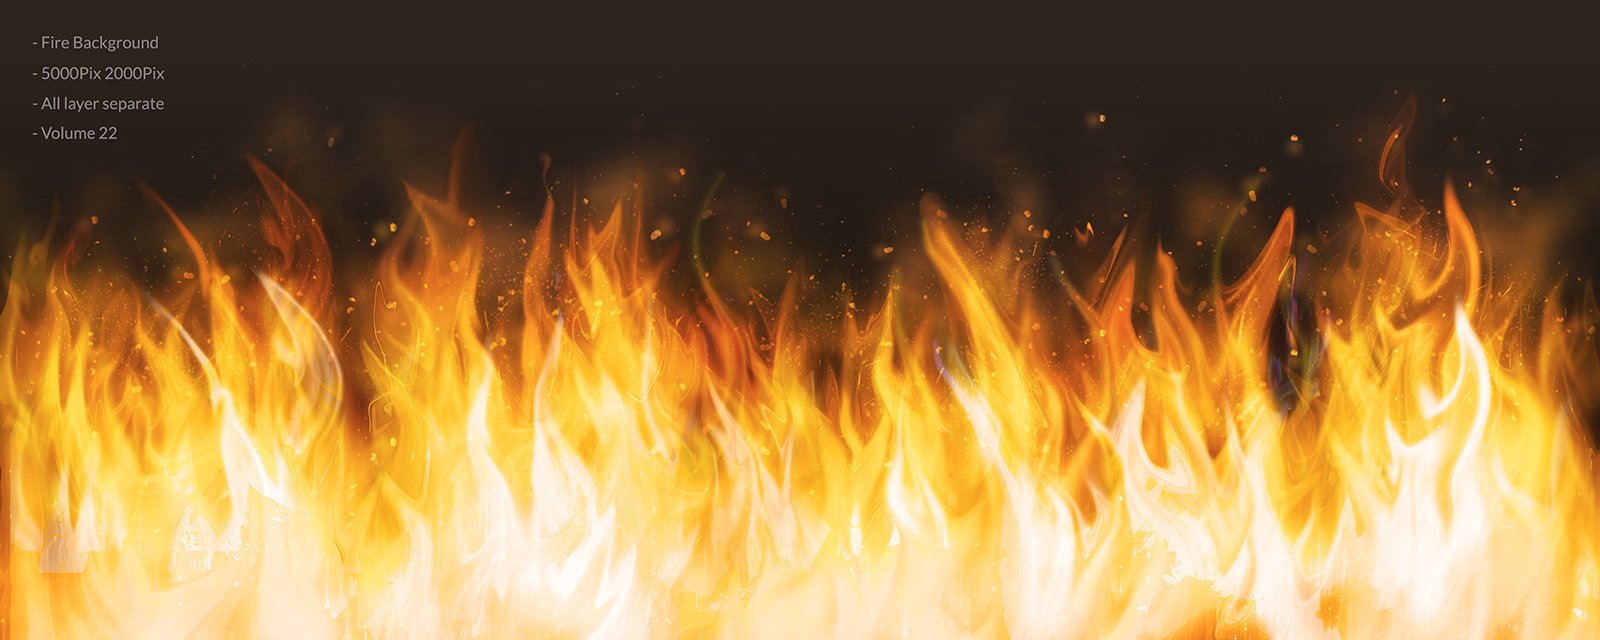 fire background 25 564